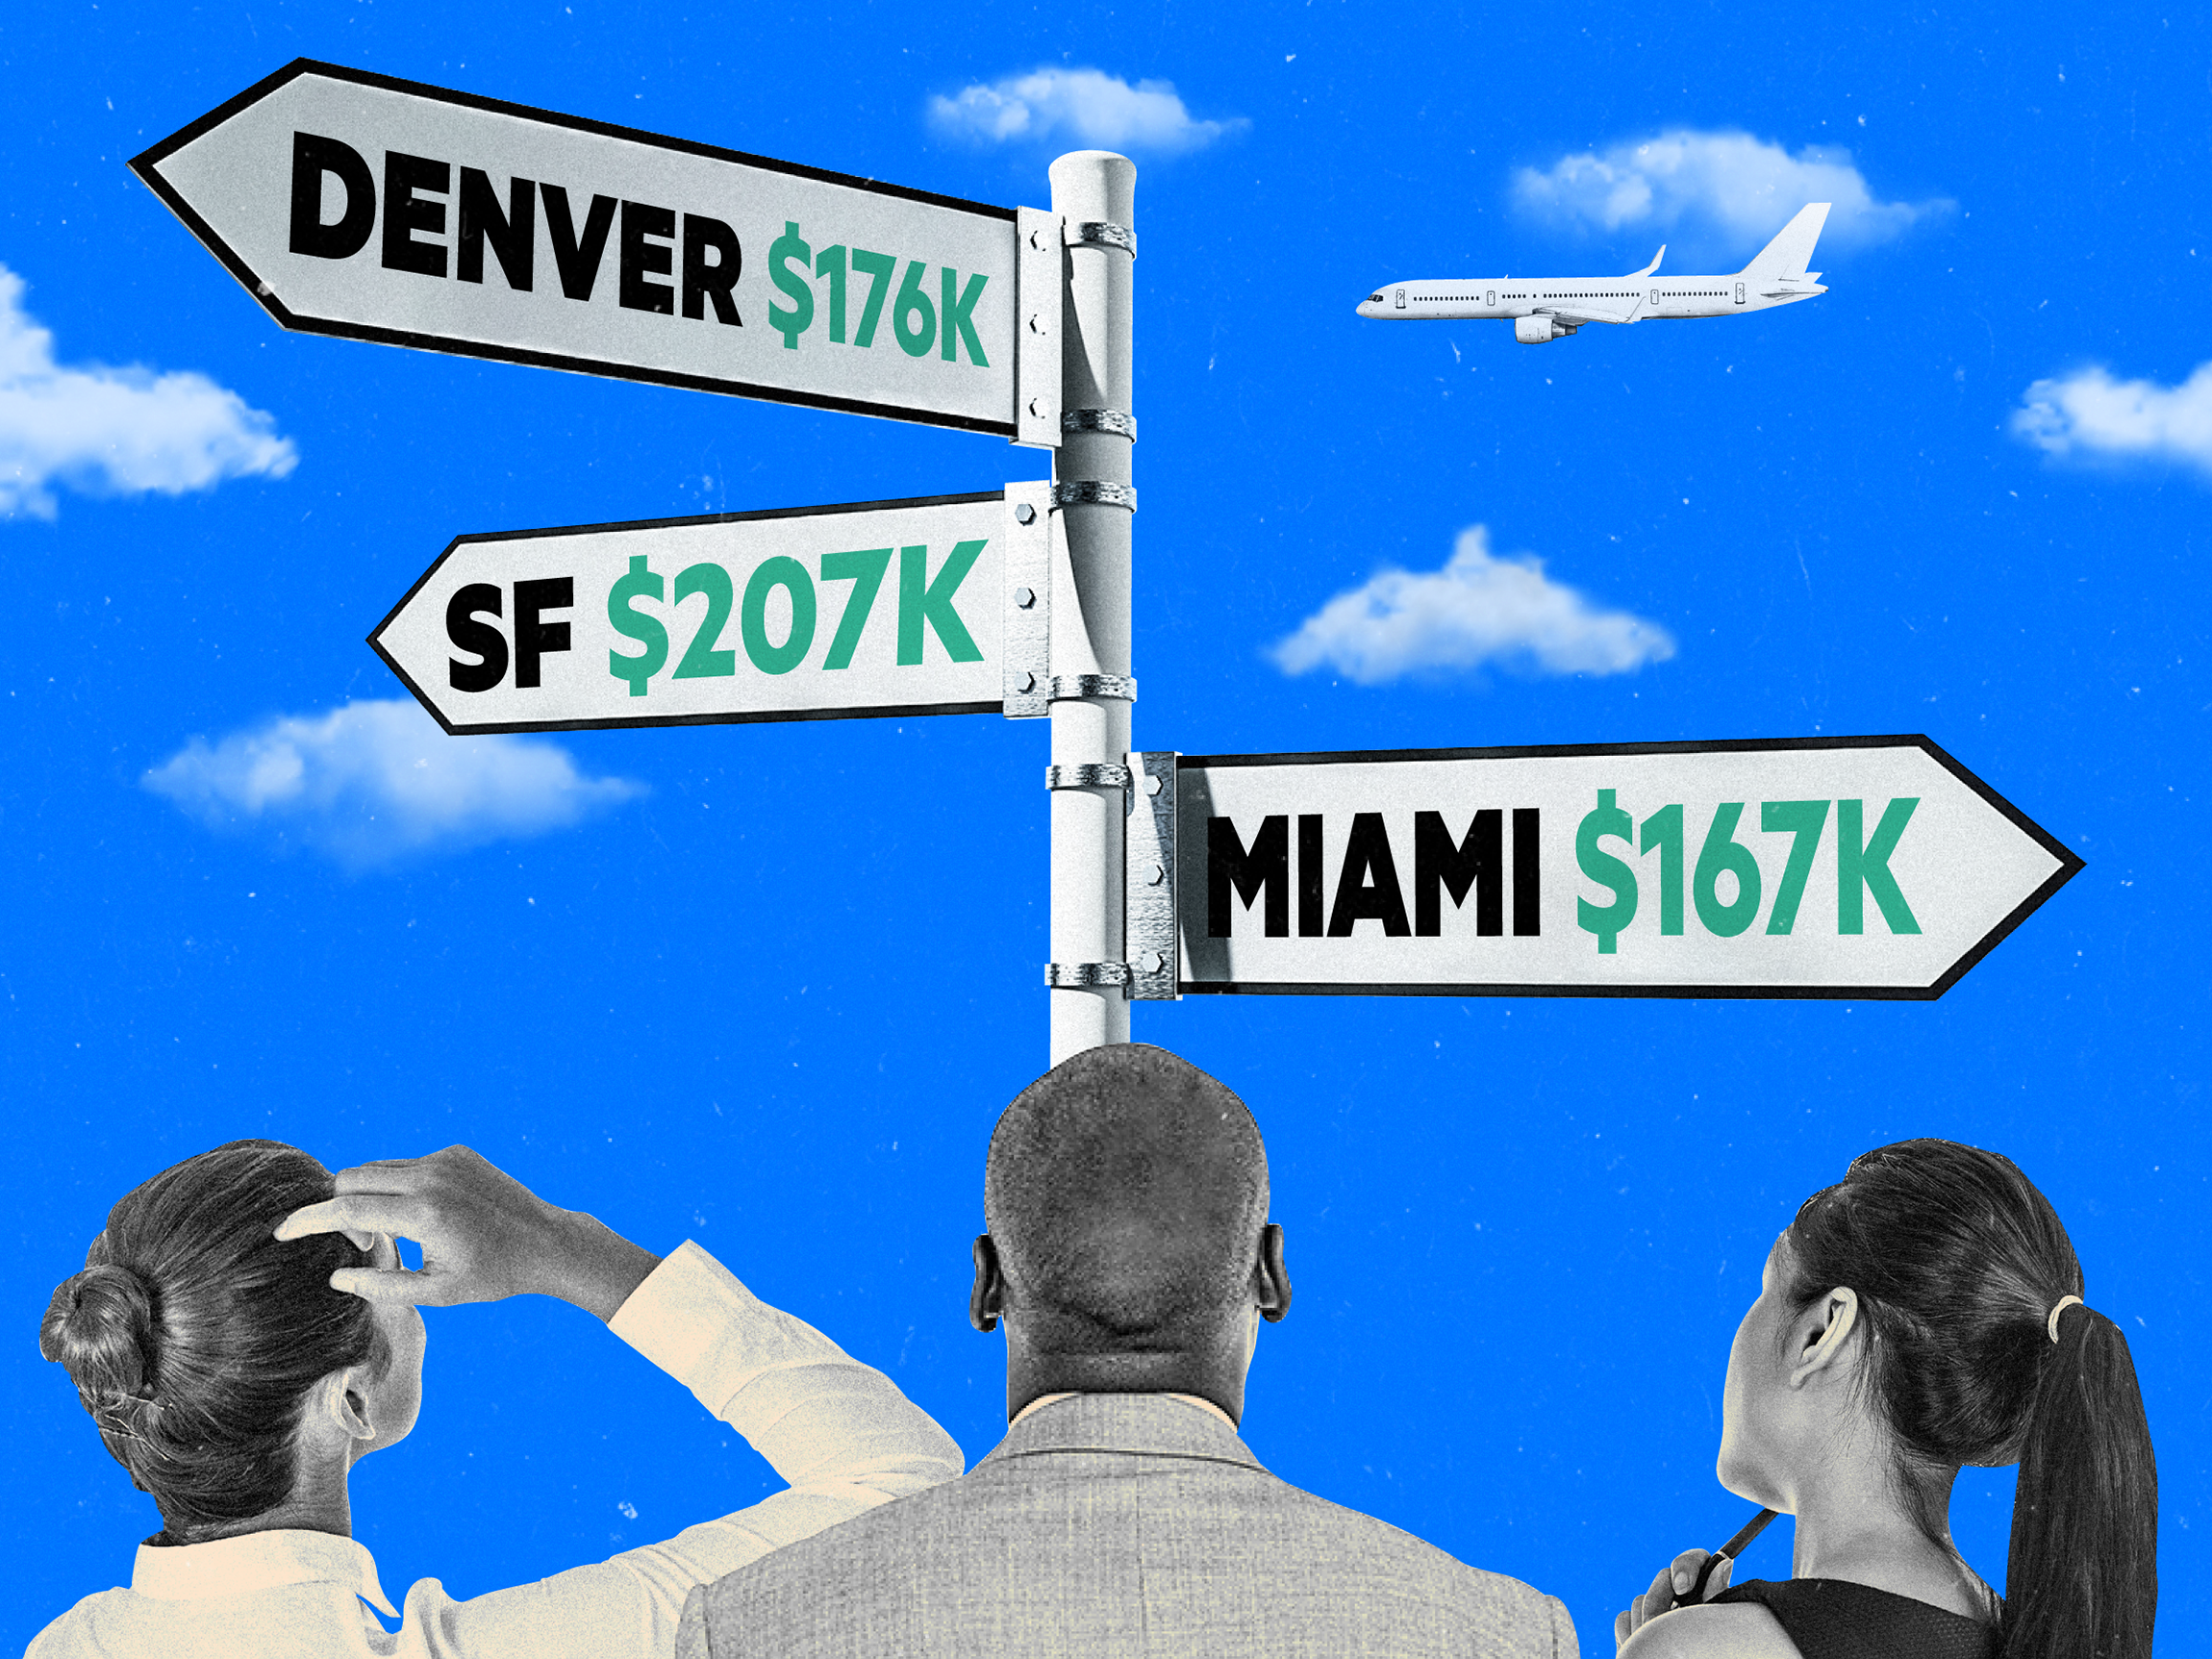 Three office workers looking up at a signpost pointing to Denver, San Francisco, and Miami. Clouds and an airplane behind them on a blue background.